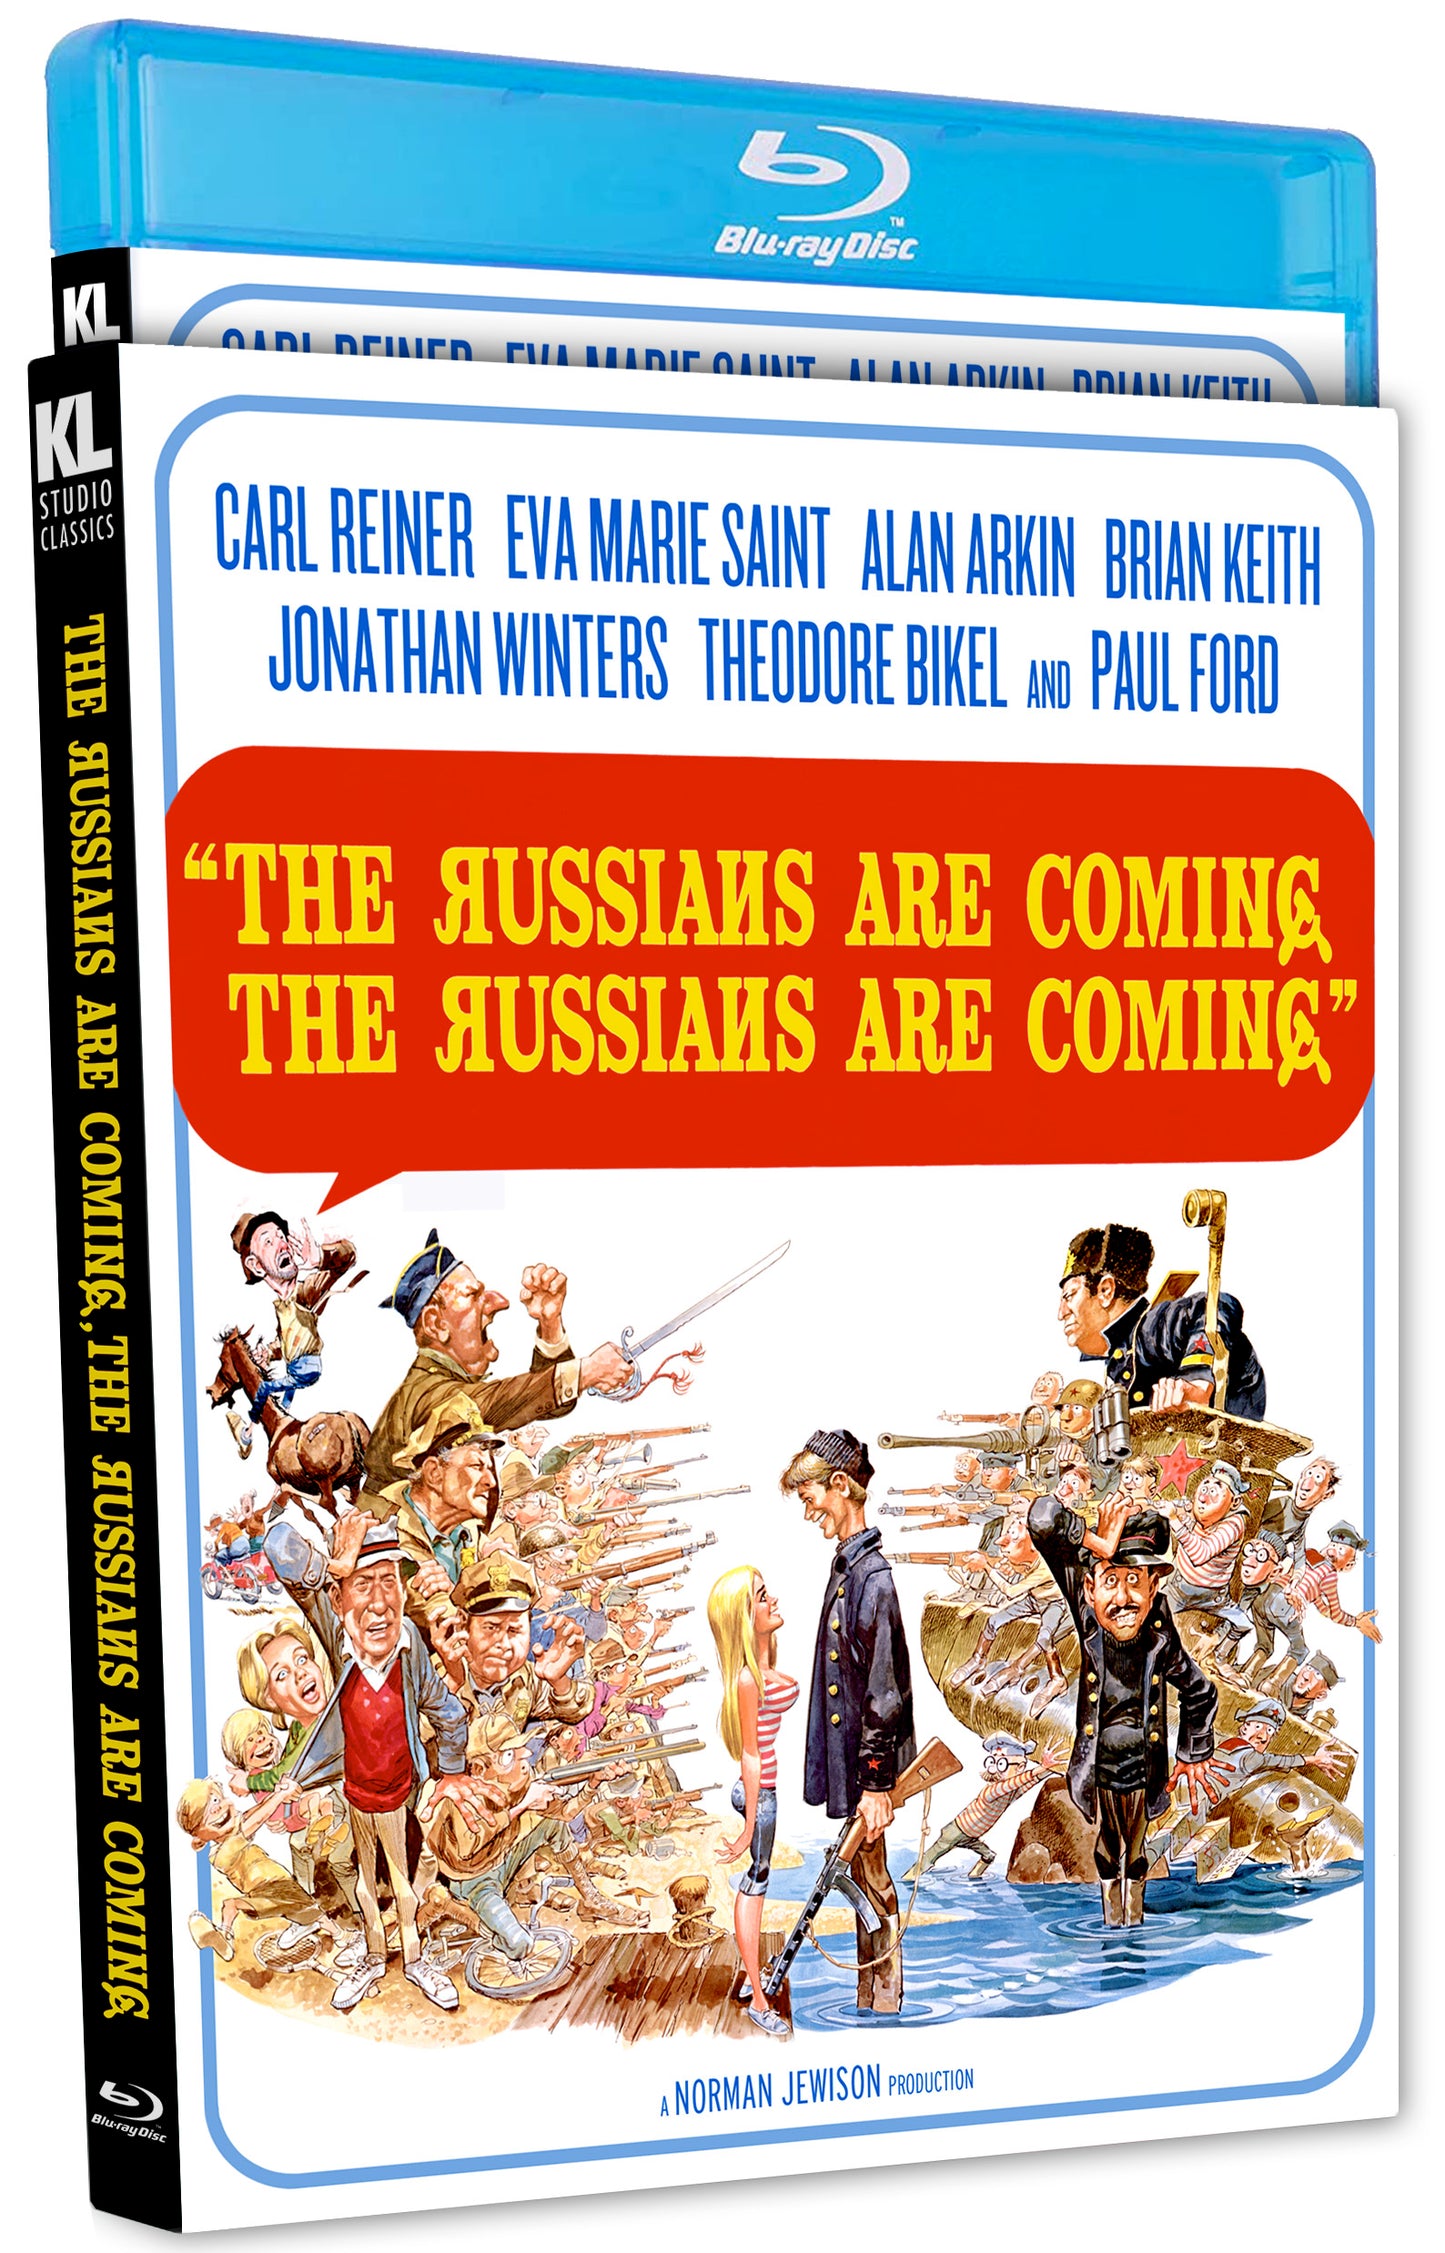 The Russians Are Coming, The Russians Are Coming Special Edition Blu-ray with Slipcover (Kino Lorber)